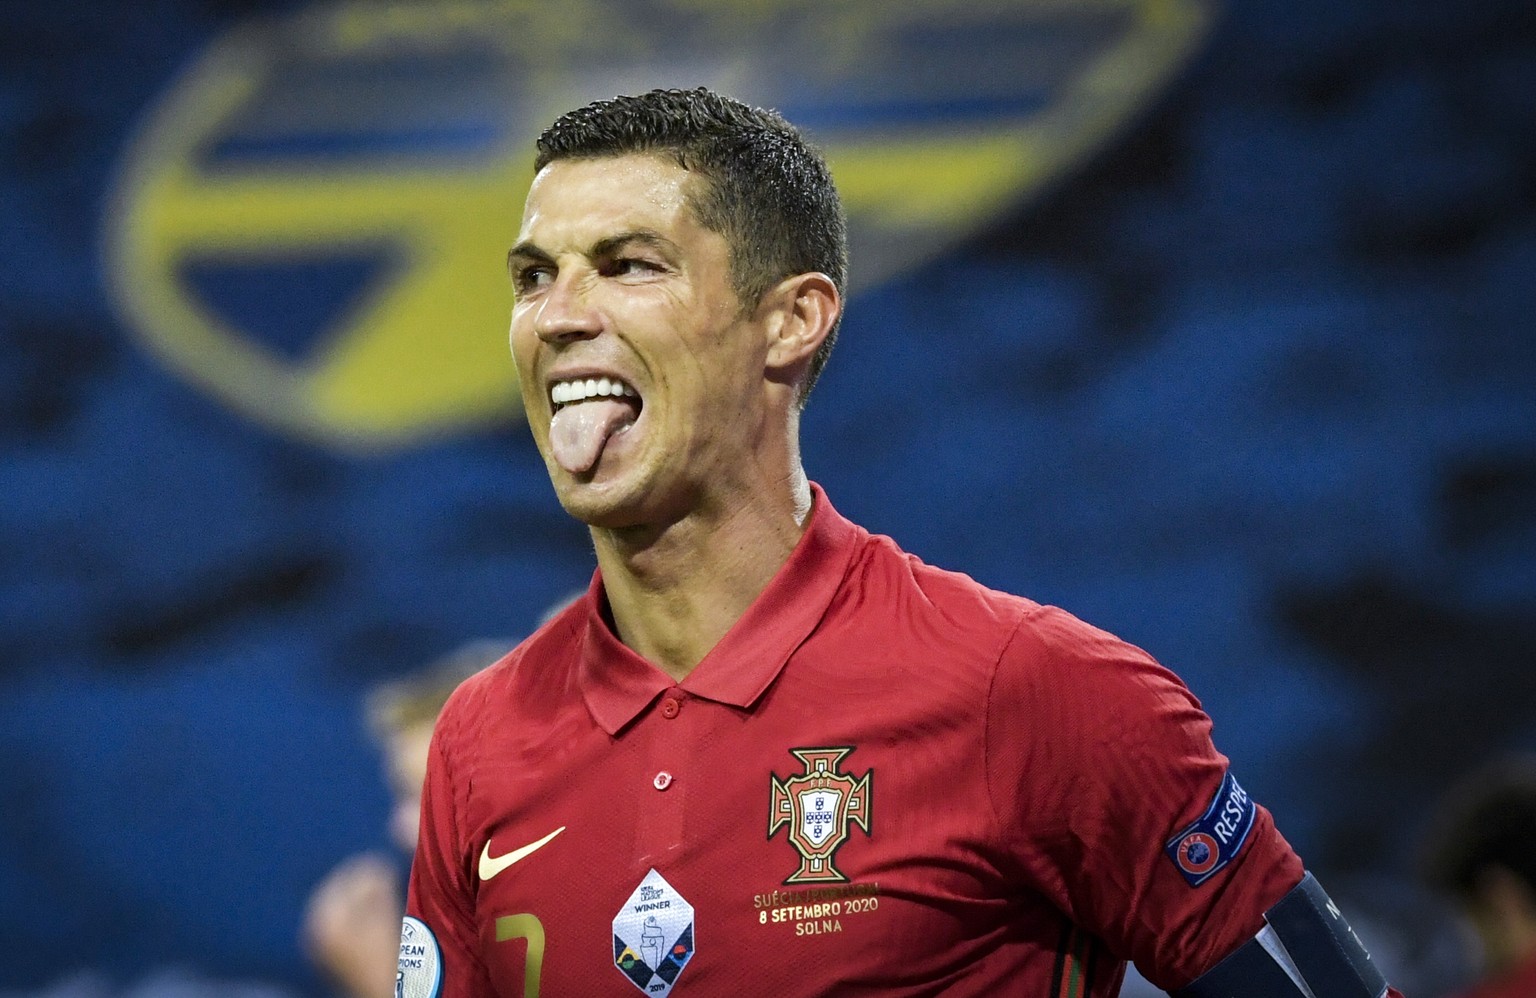 epa08655403 Portugals Cristiano Ronaldo reacts during the UEFA Nations League, division A, group 3 soccer game betwween Sweden and Portugal at Friends Arena in Stockholm, Sweden, 08 September 2020. EP ...